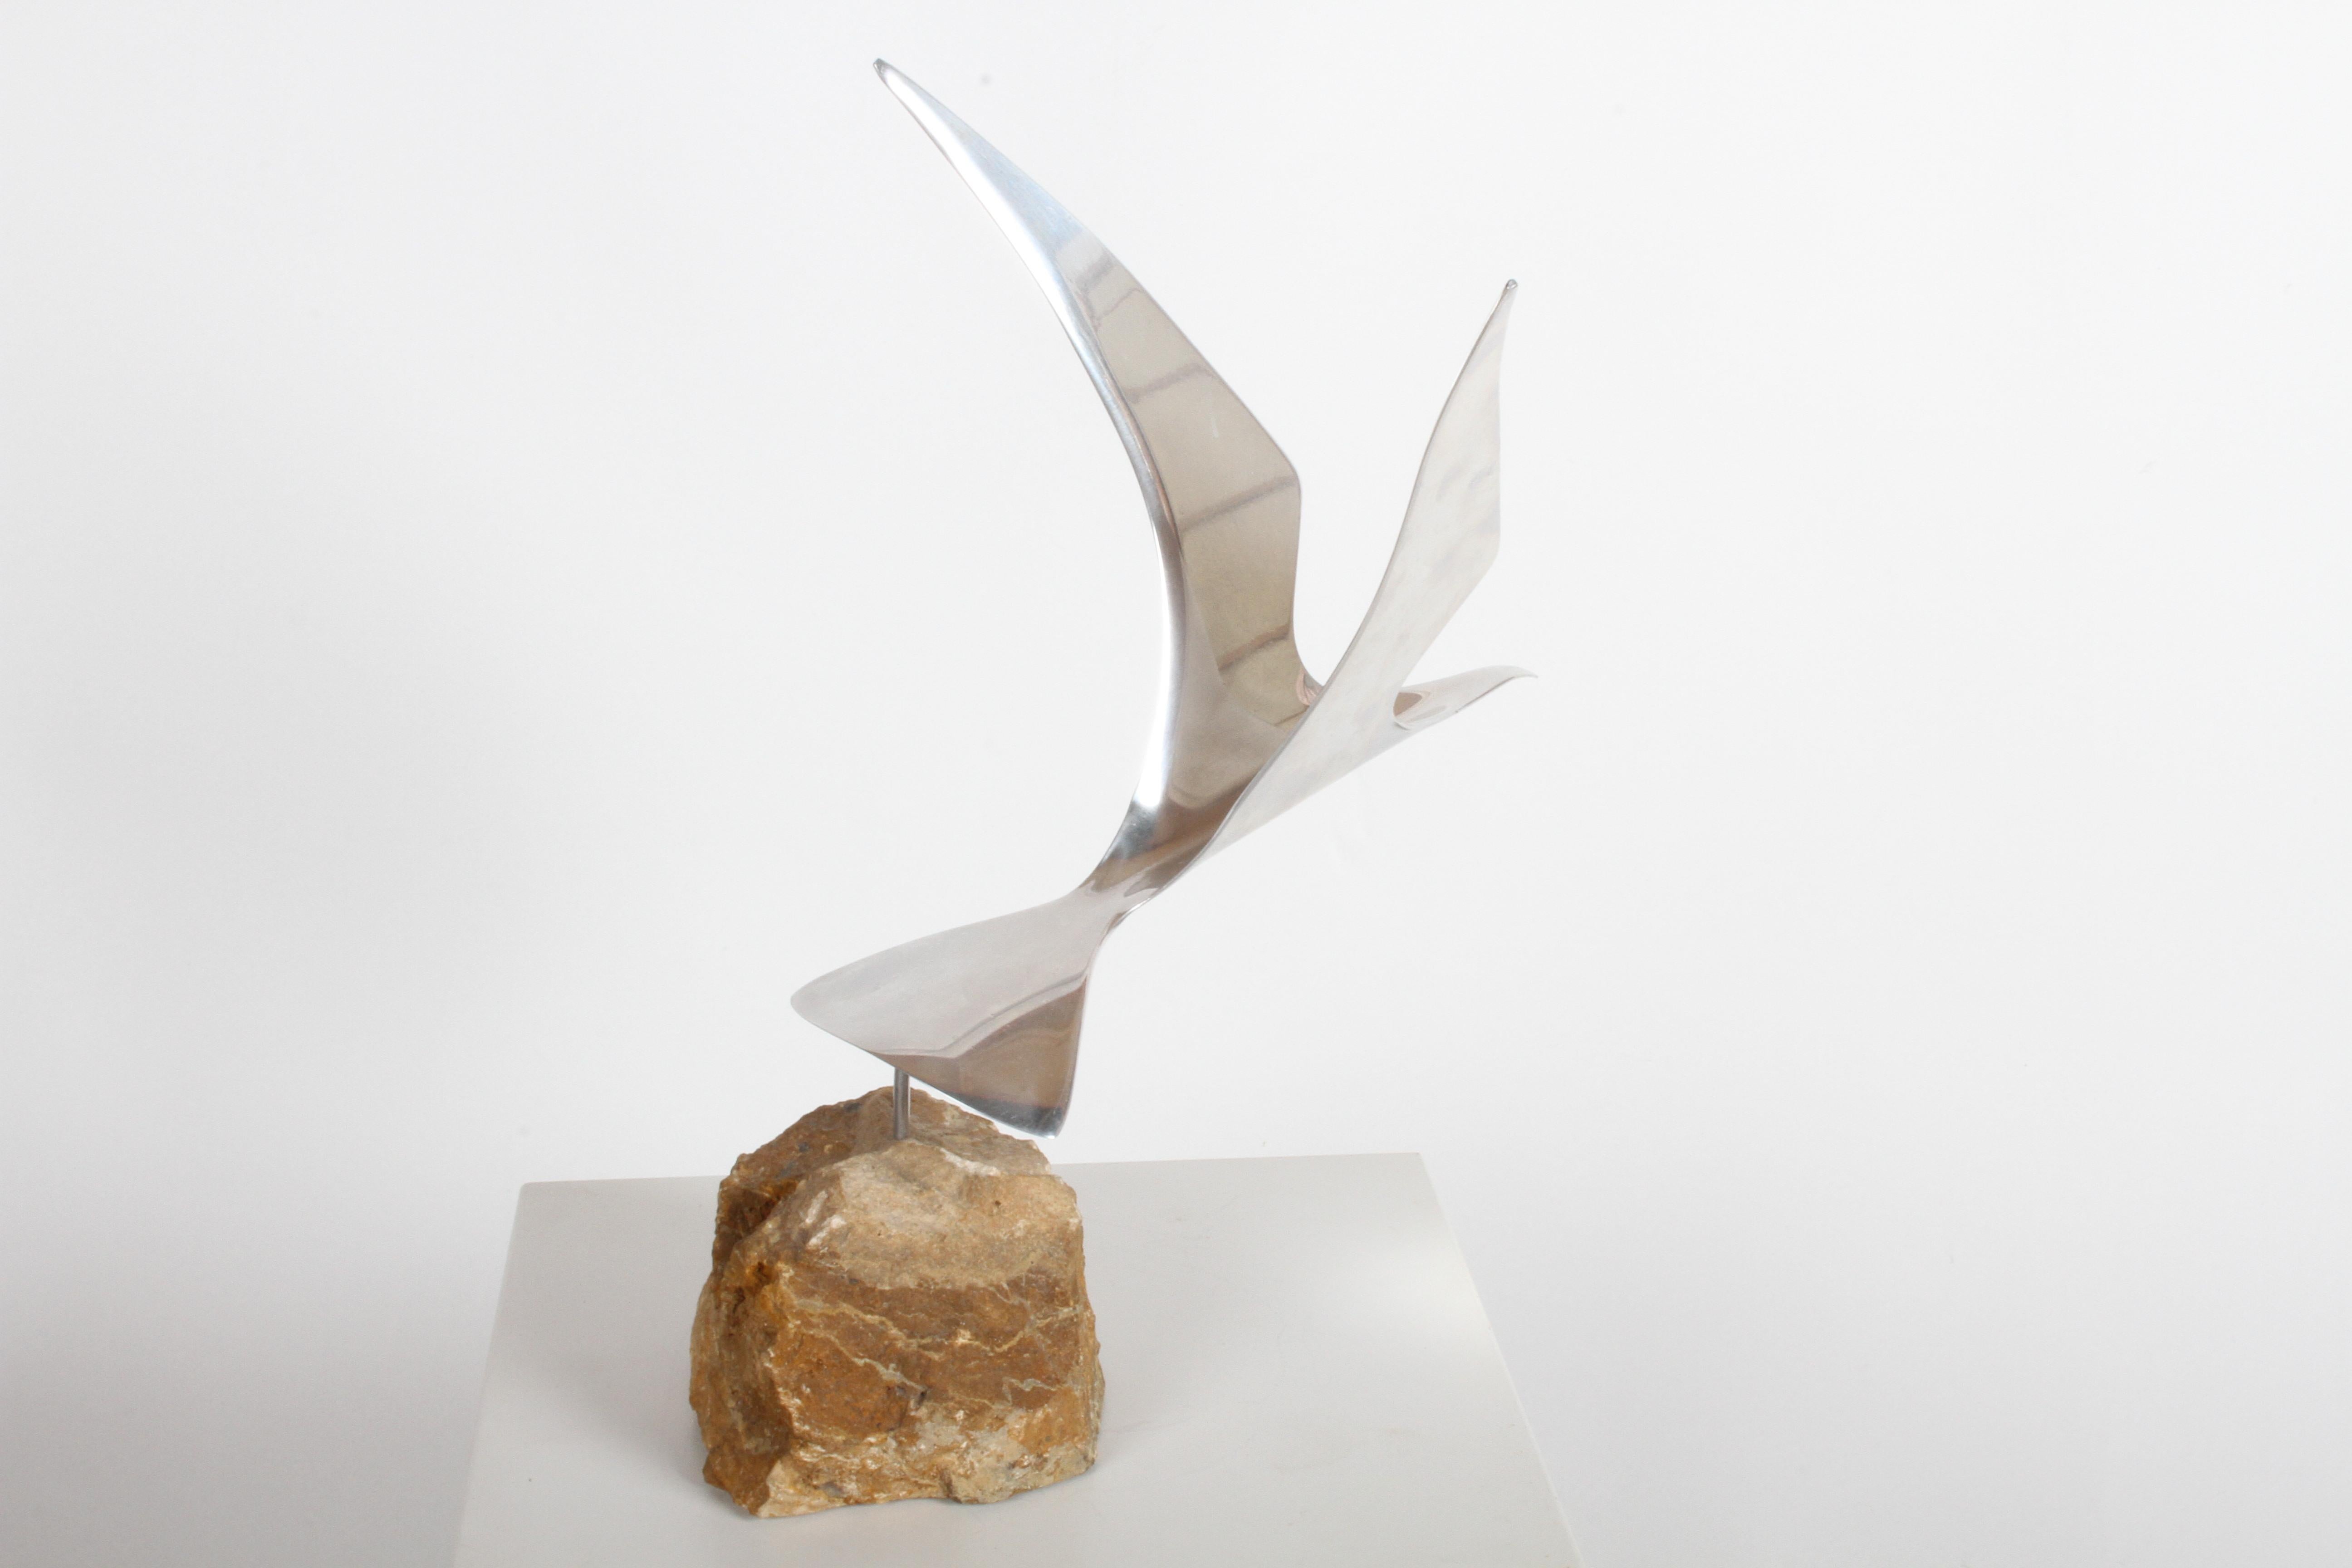 Curtis Jere aluminum flying seagull table sculpture on quartz rock base, signed on lower right tail C. Jere, 1980. Signature is scratched into aluminum, hard to photograph. Very nice original condition.